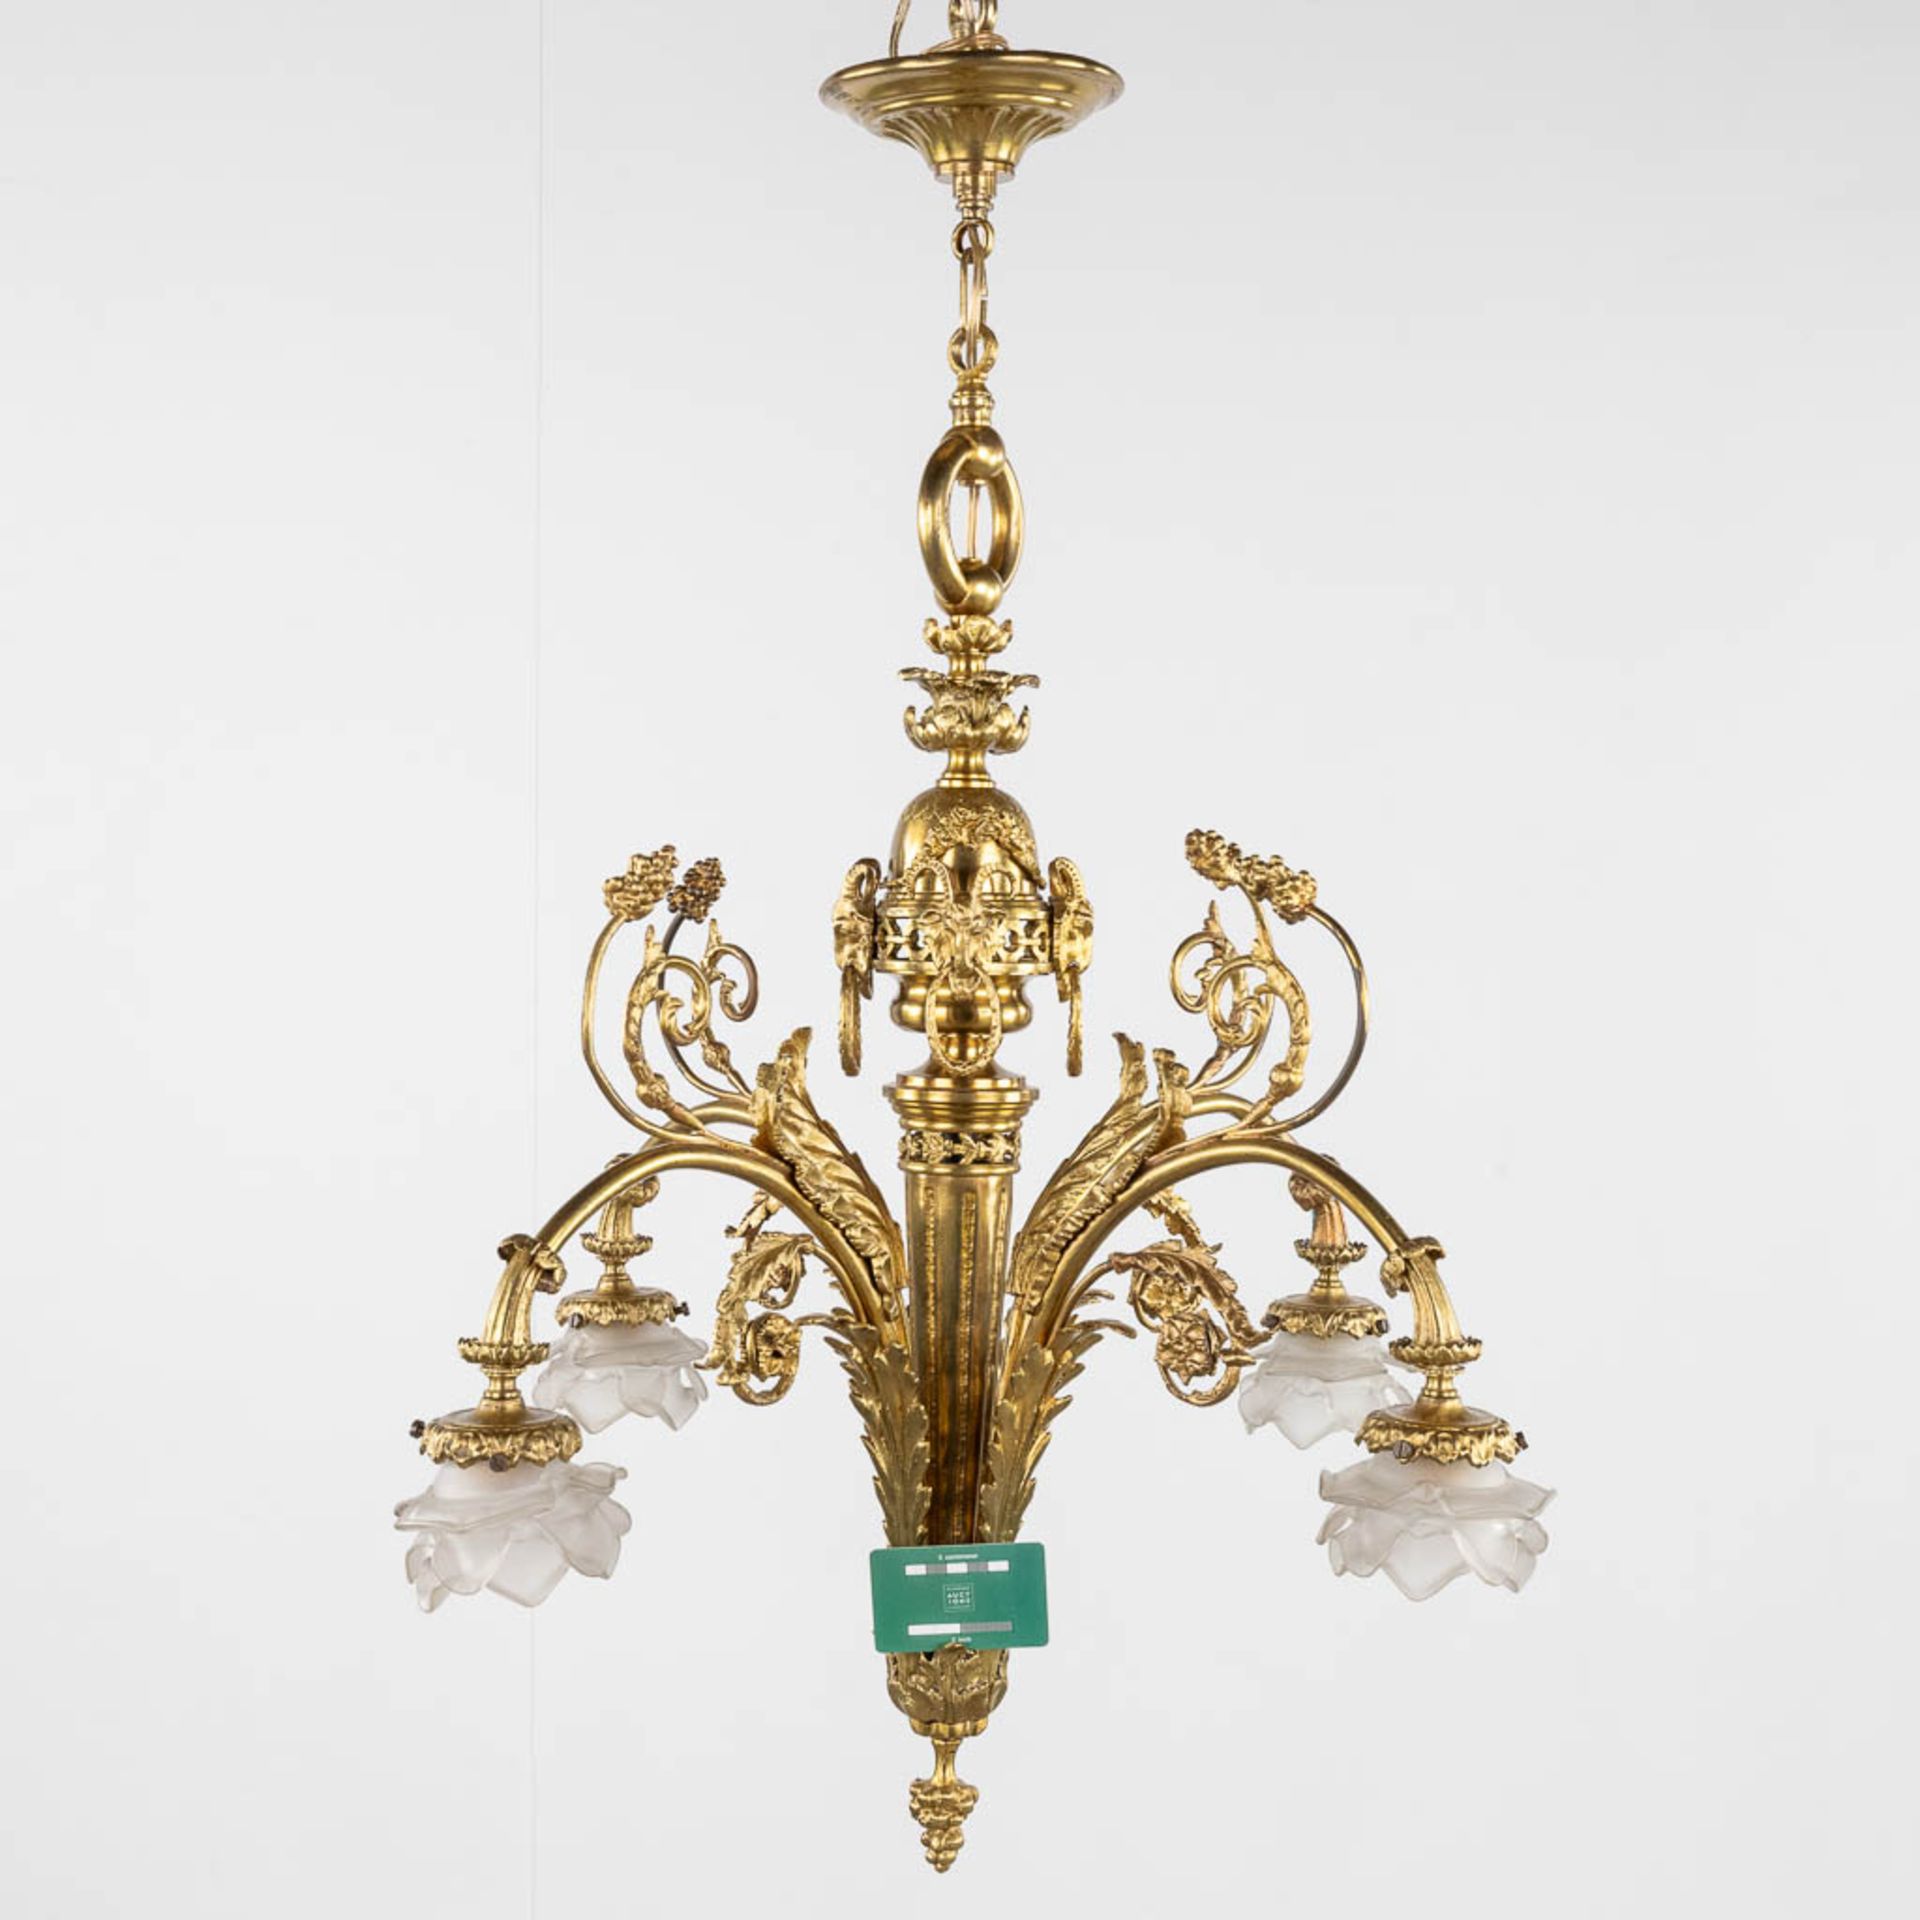 A chandelier, bronze finished with ram's heads, Louis XVI style. (H:93 x D:66 cm) - Image 2 of 13